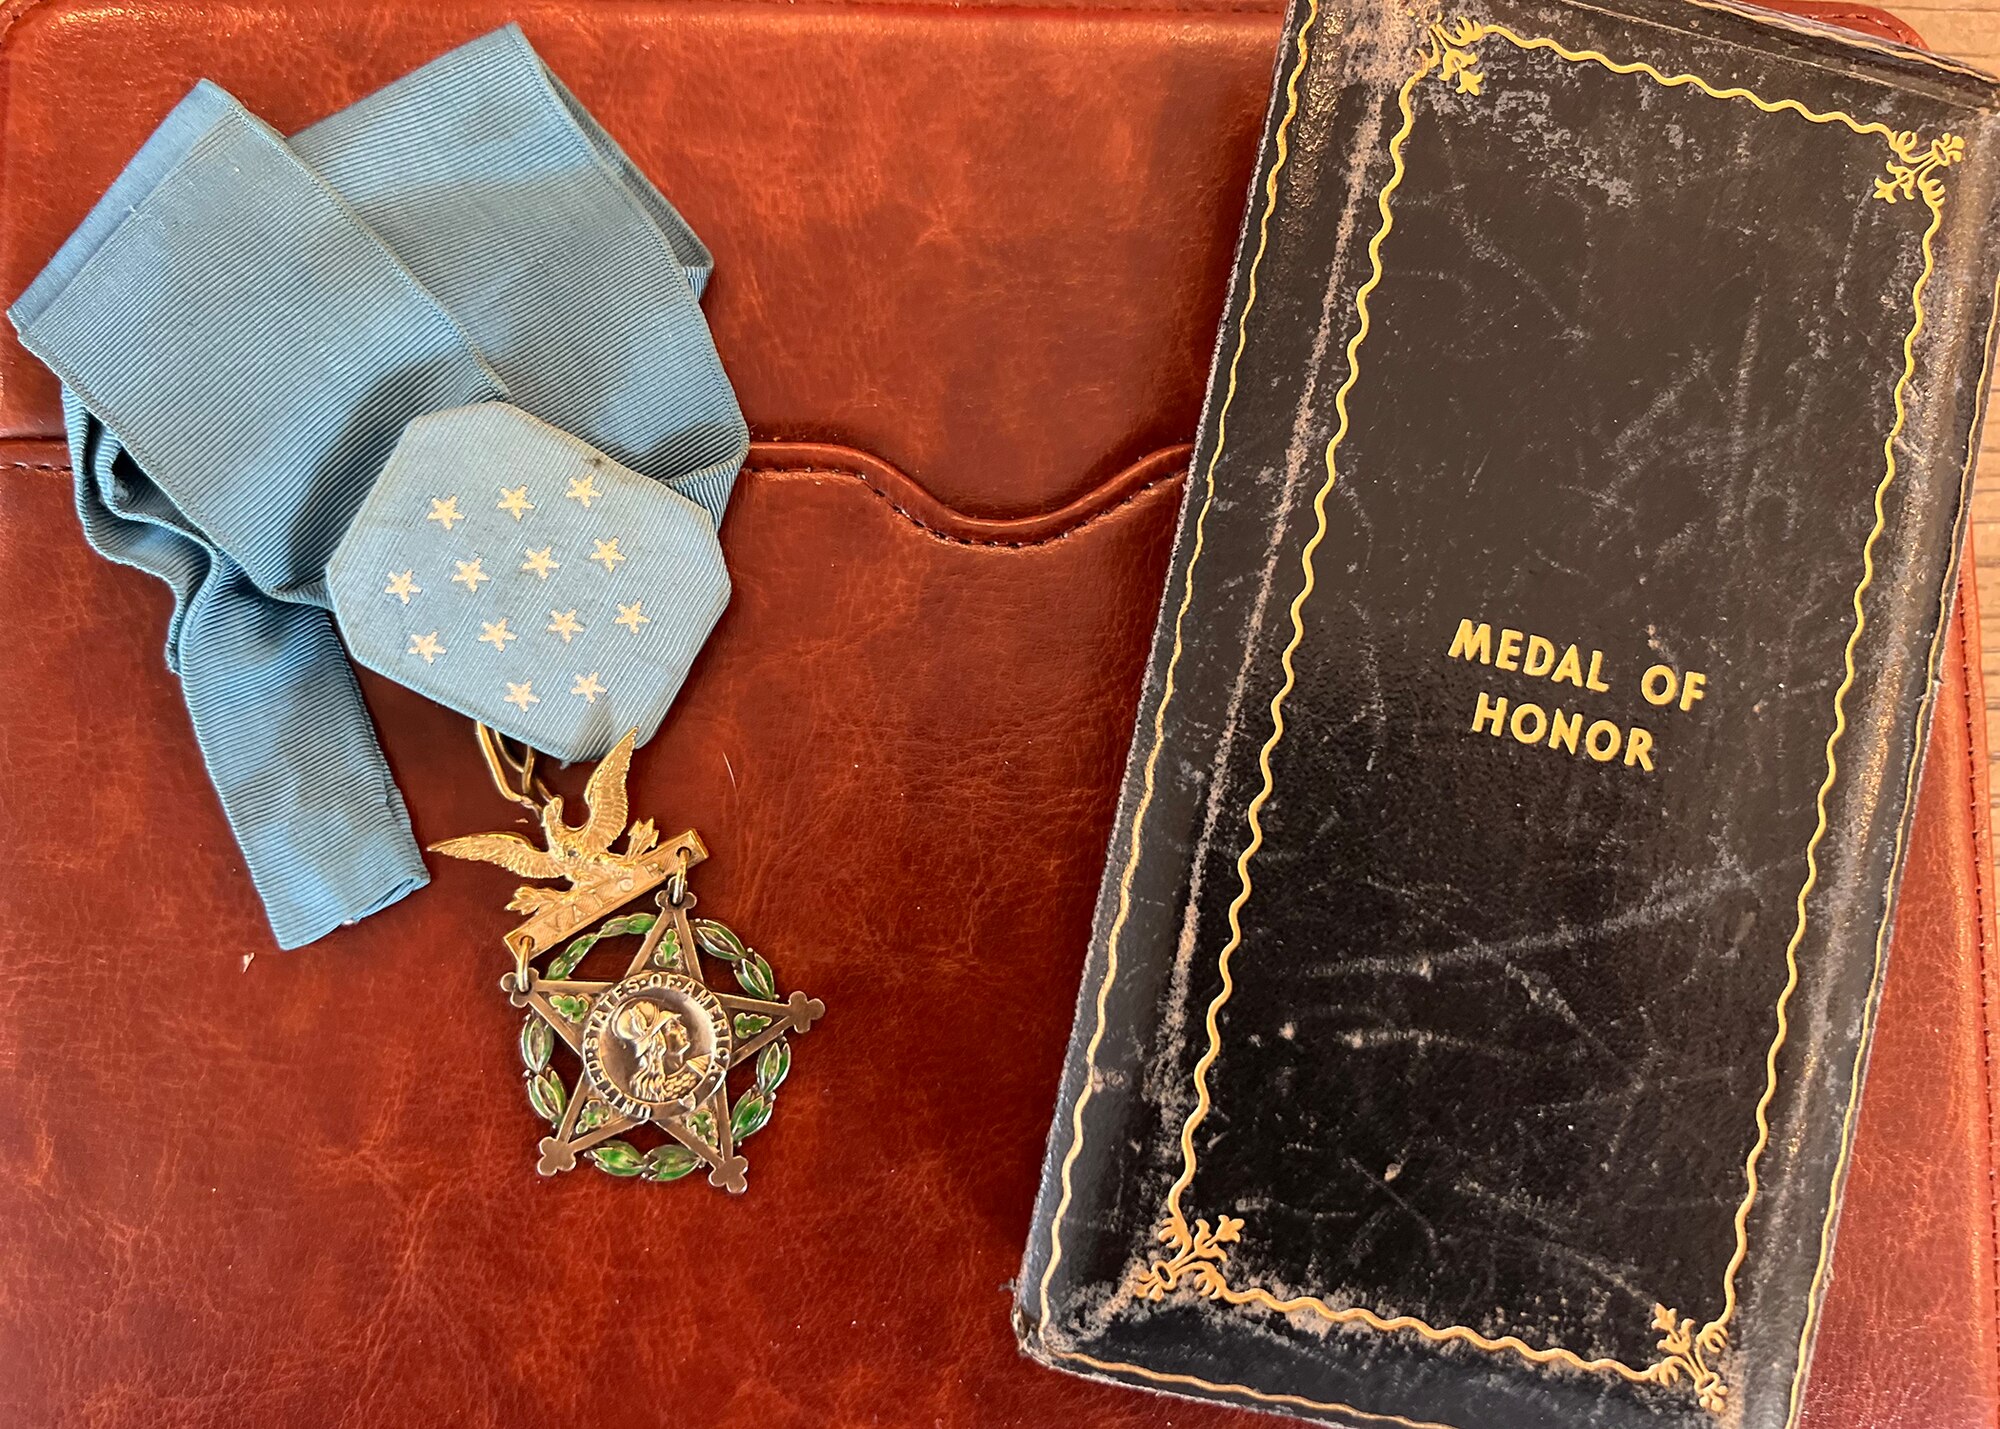 medal of honor and case on a red background